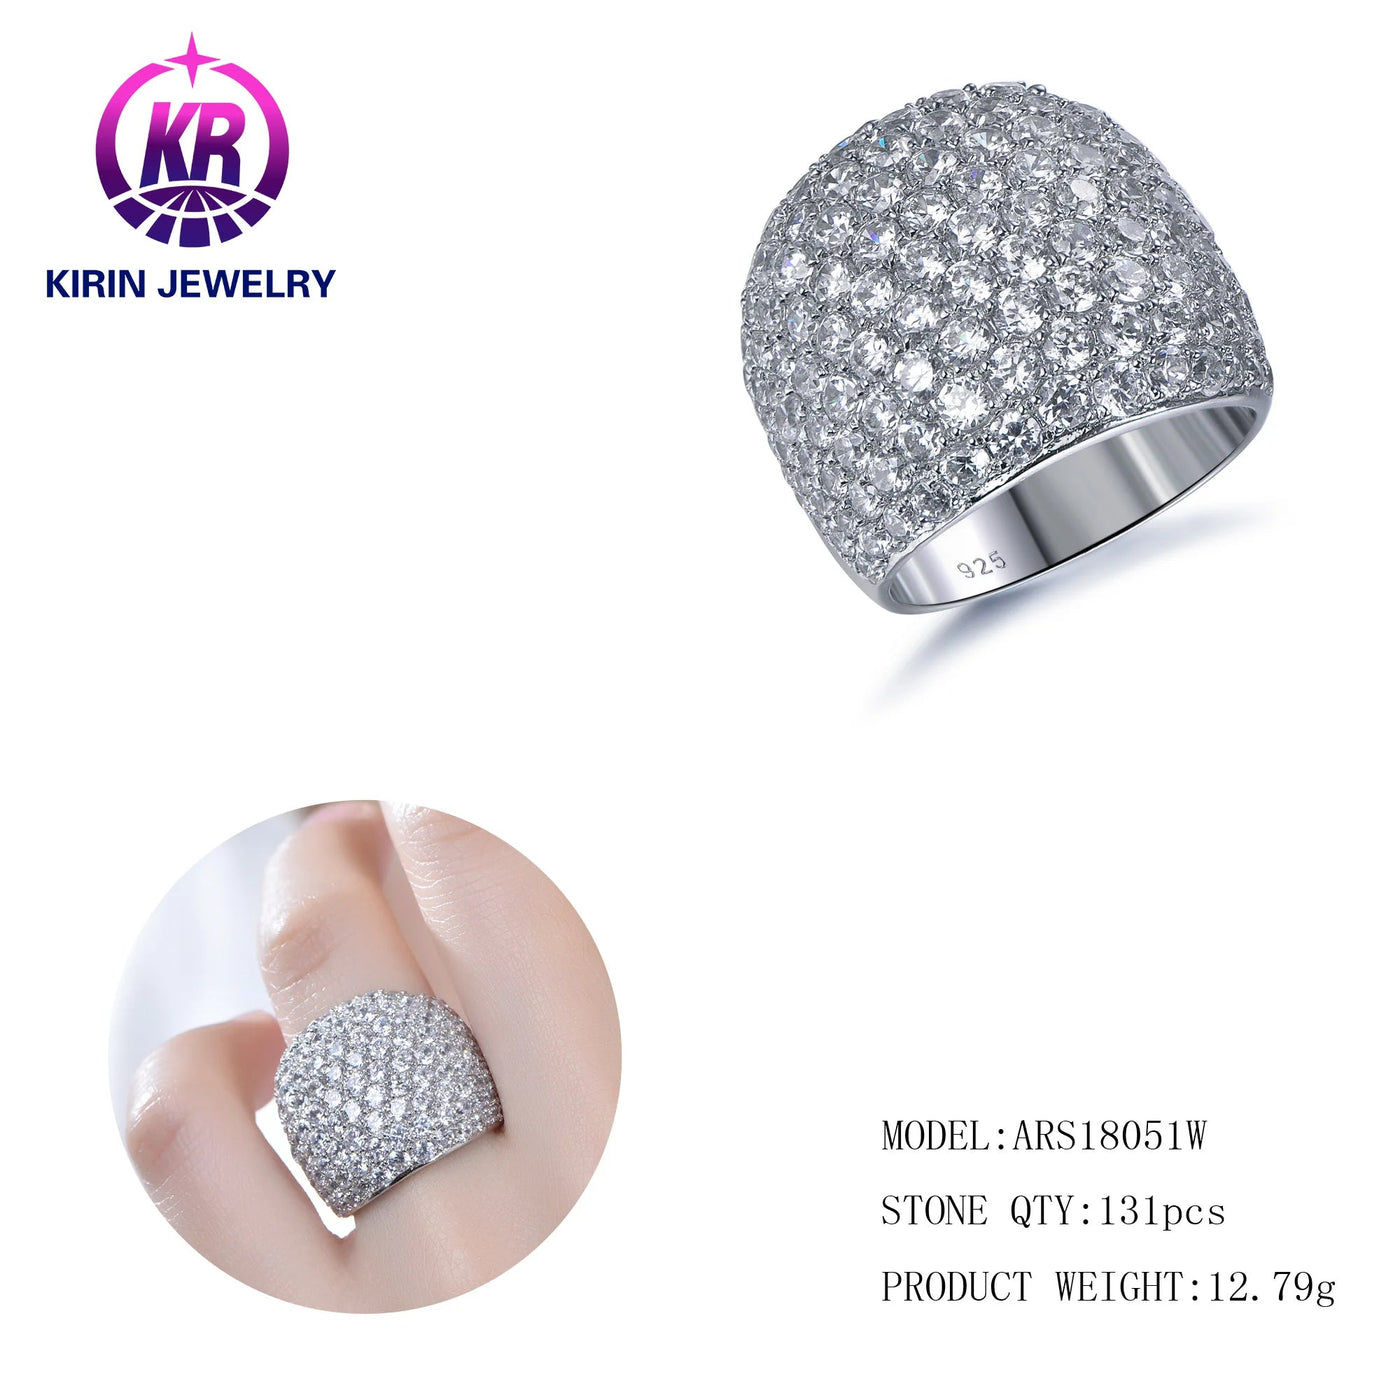 New fashion high quality S925 sterling silver rings 3A Cubic Zirconia for women bridal wedding fashion jewelry Kirin Jewelry